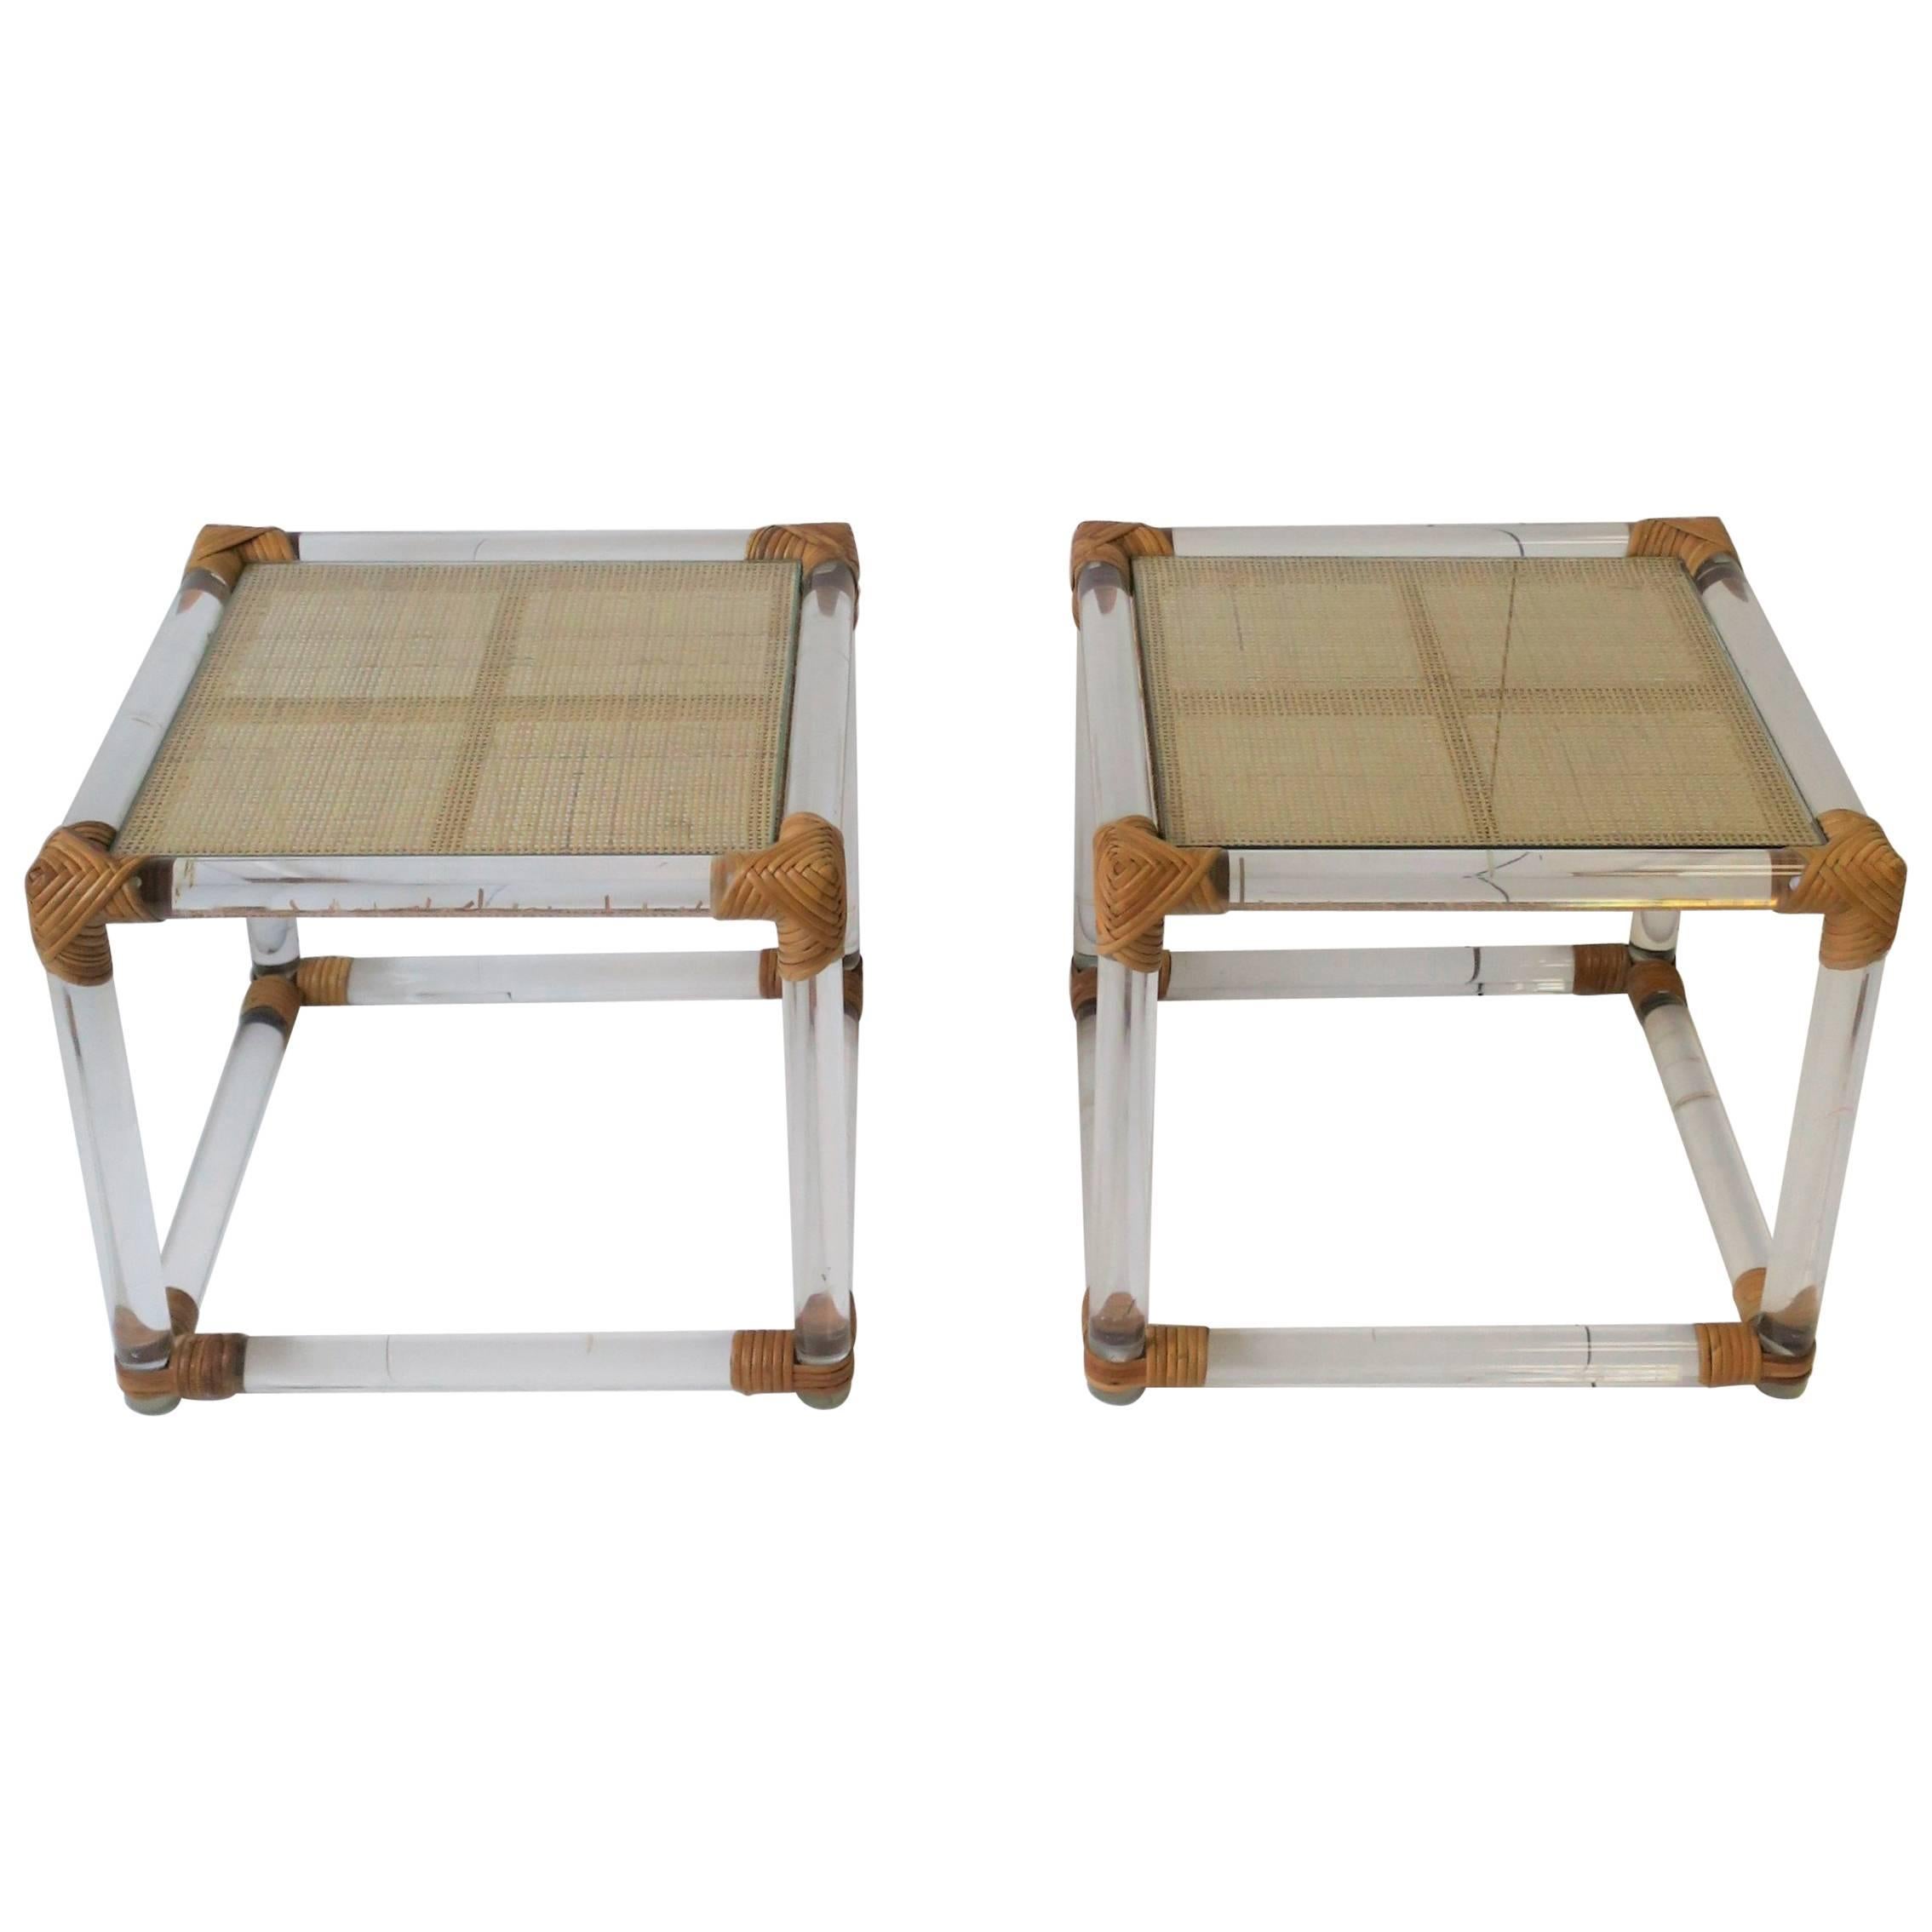 Pair of Modern Lucite and Wicker Rattan End Tables